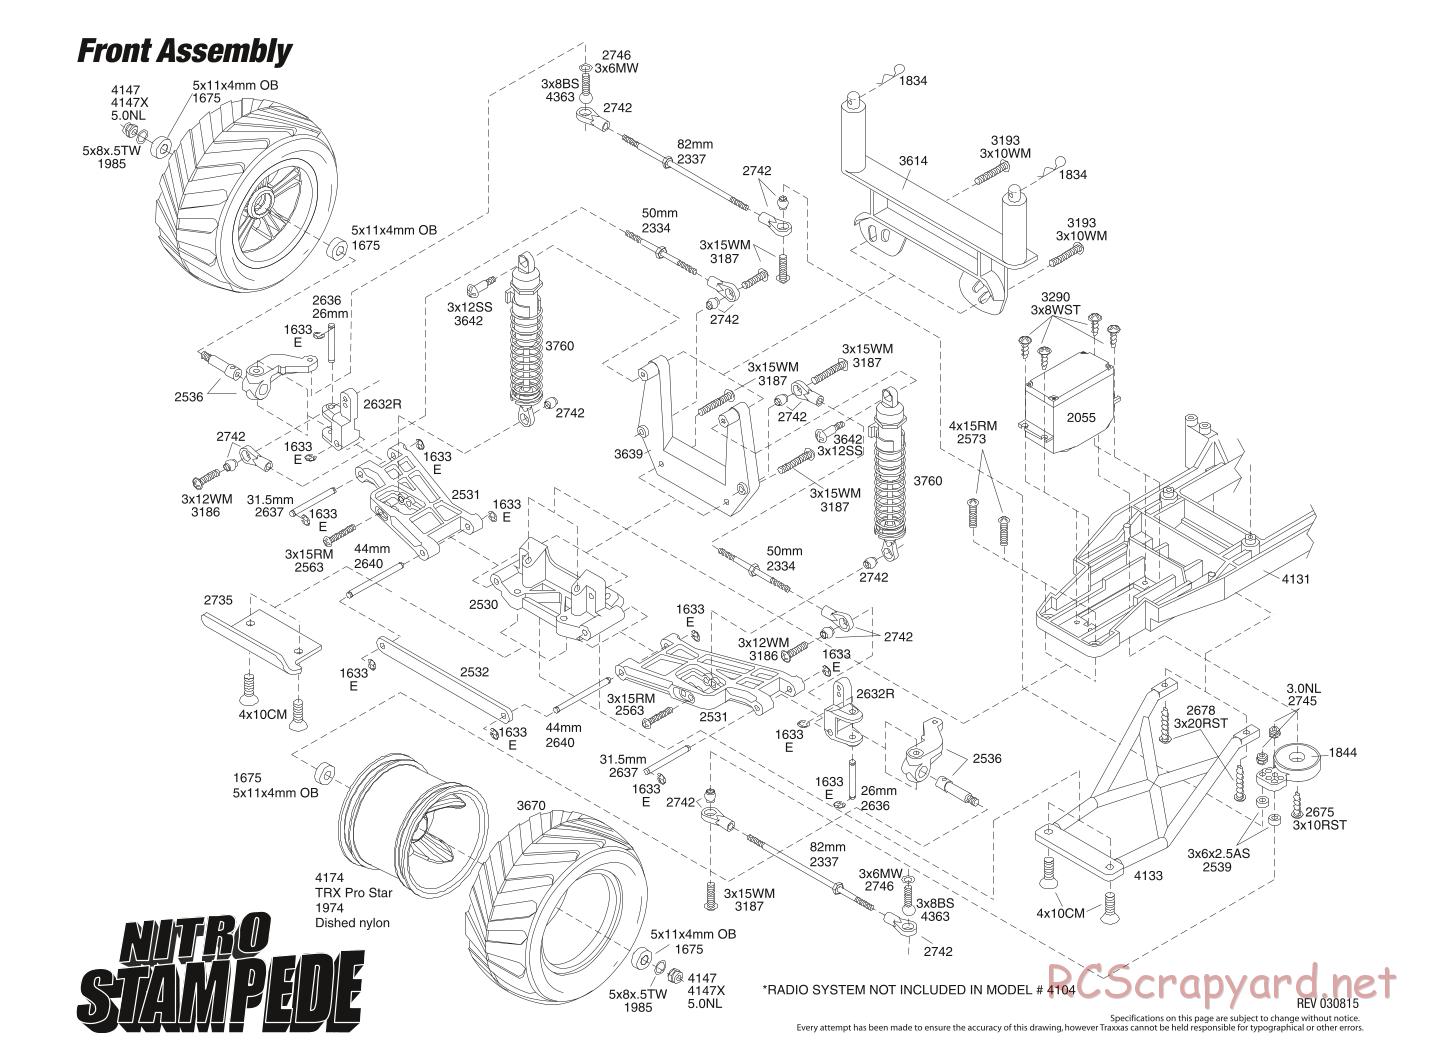 Traxxas - Nitro Stampede - Exploded Views - Page 2